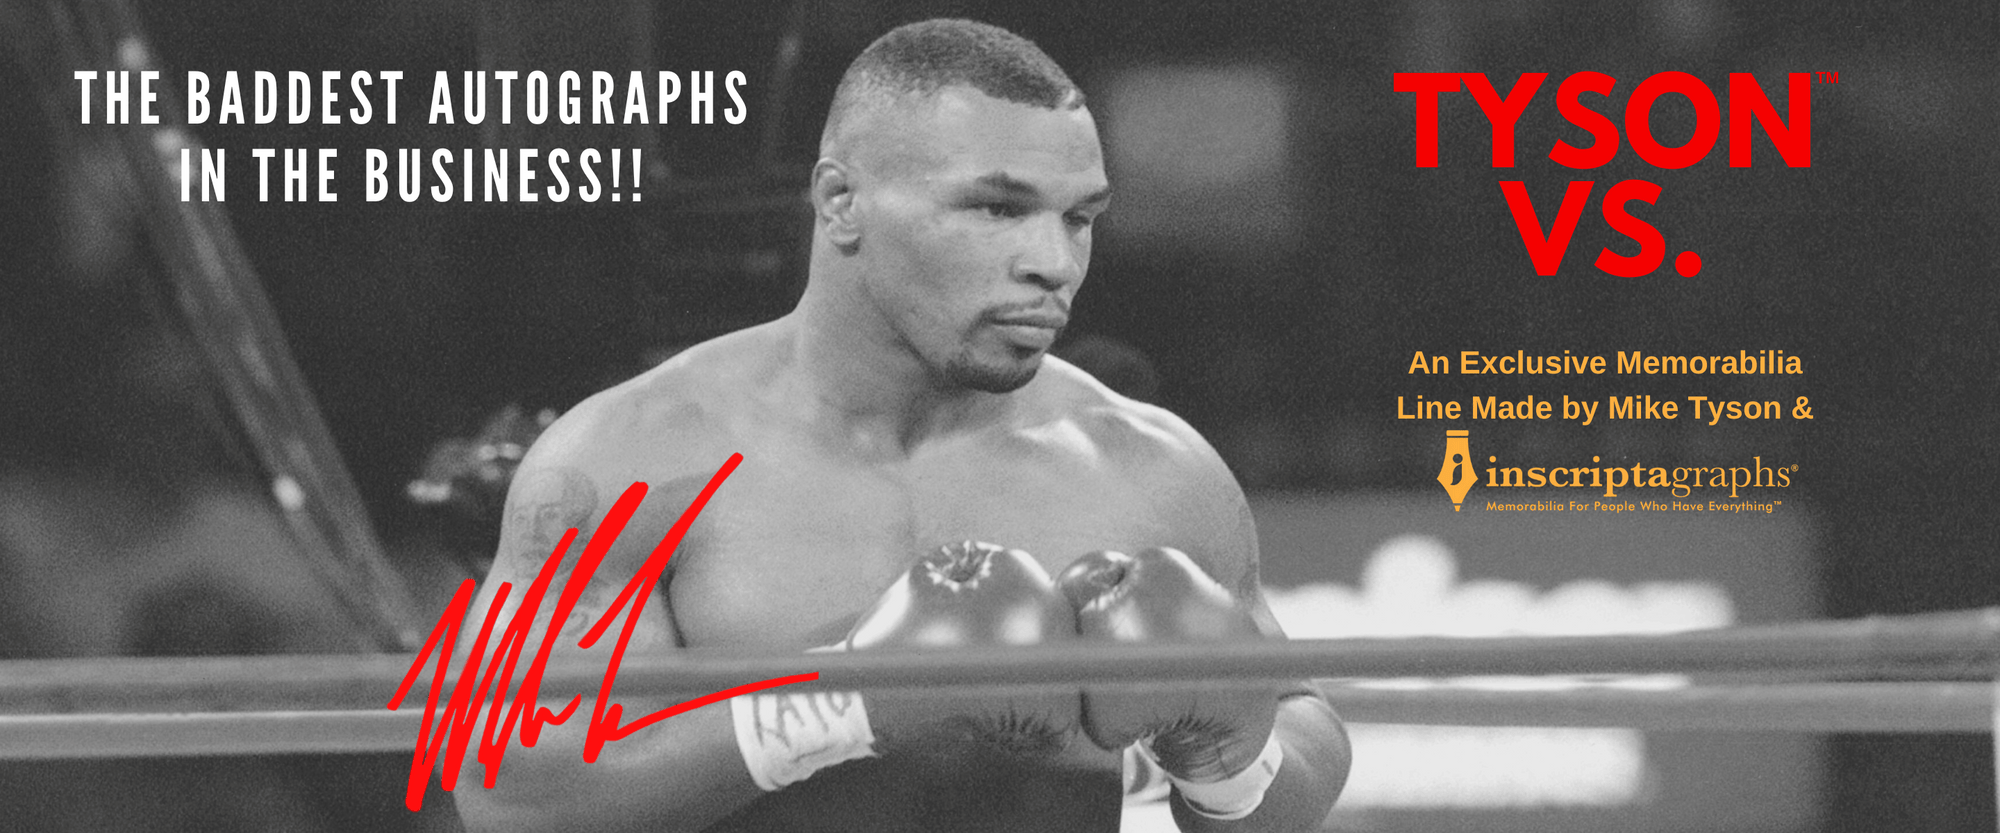 Shop Inscriptagraphs' exclusive memorabilia collection named Tyson Vs. featuring signatures from boxer Mike Tyson! This collection which is "the baddest autographs in the business" is a exclusive memorabilia line made by Inscriptagraphs and Mike Tyson! Click this banner to shop Tyson Vs. items!